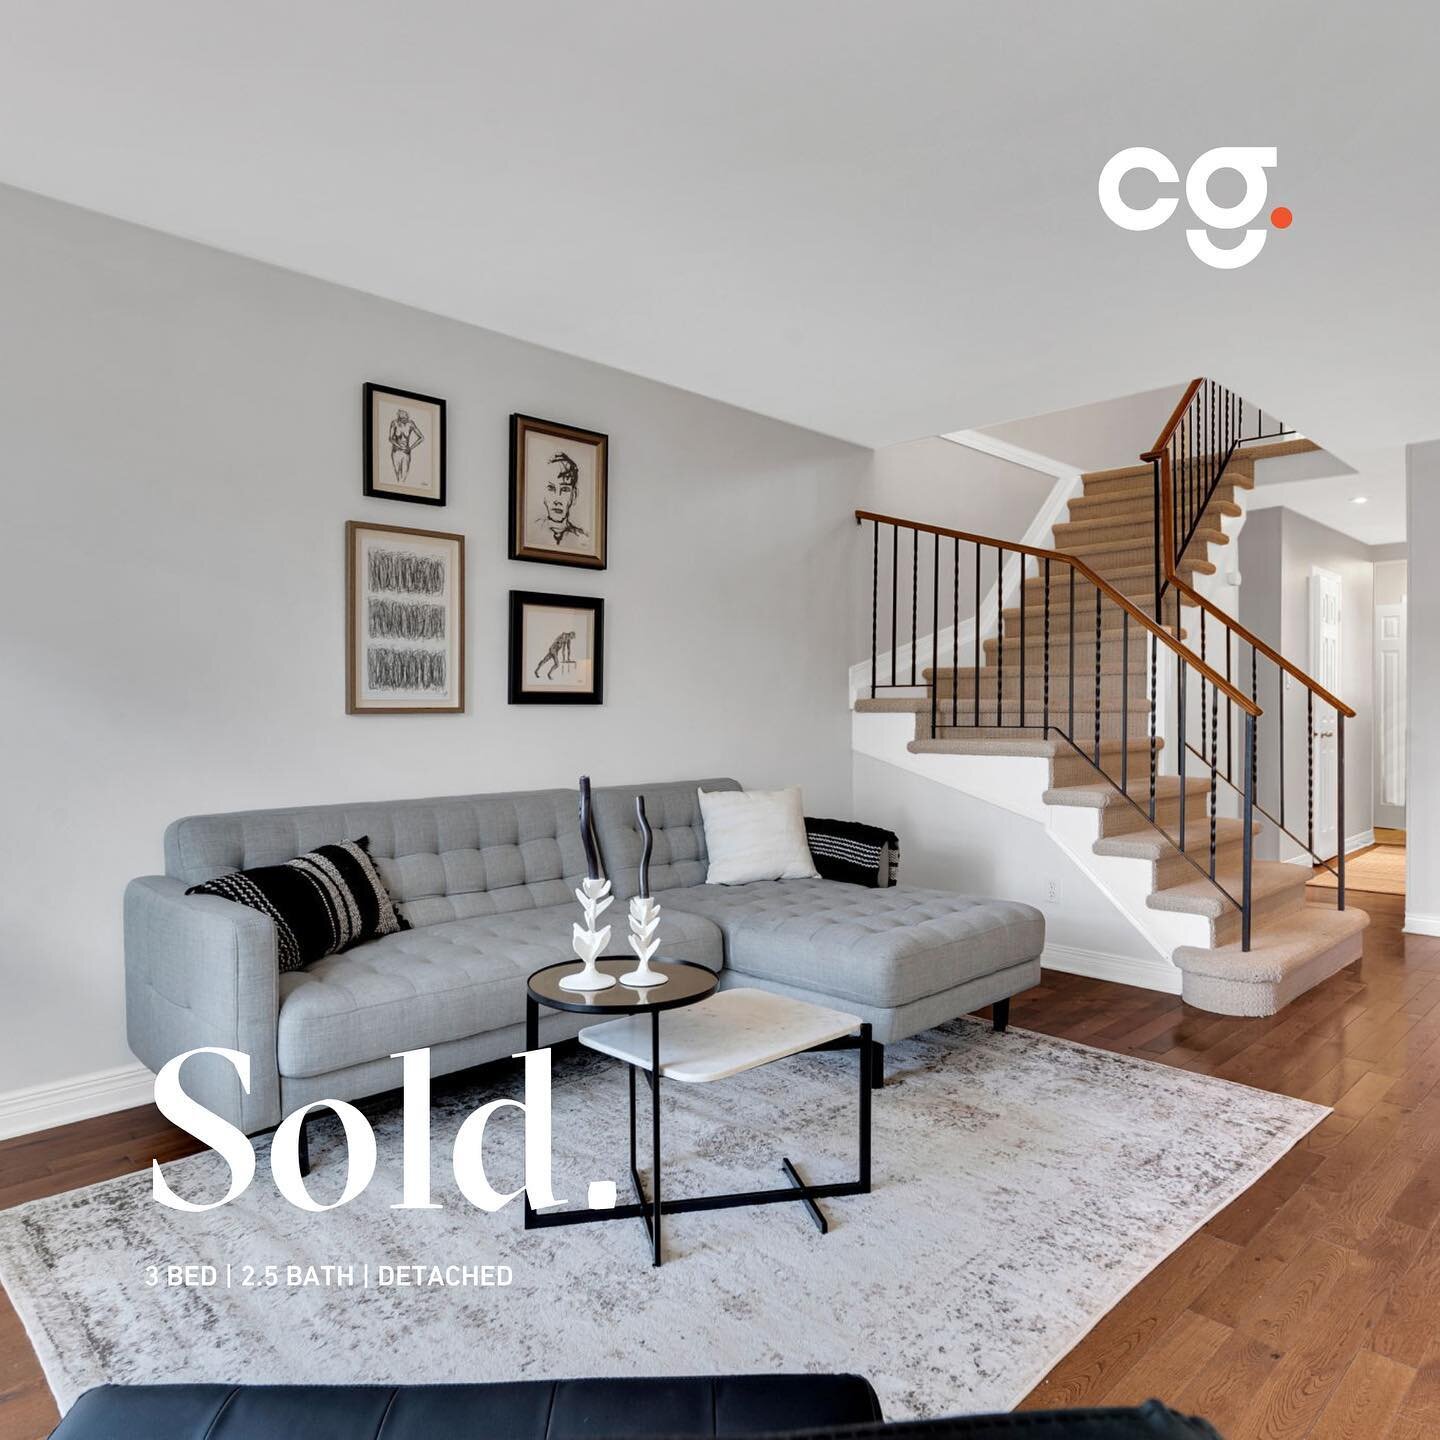 Sold | 4 Forbes Avenue 

This property has officially sold firm! Congratulations to our Seller client and to the new owners. 

Was great working on this deal with you @carley293!

🫱🏻&zwj;🫲🏾

&mdash;
#ottawarealestate #ottawarealtor #ottawarealtor